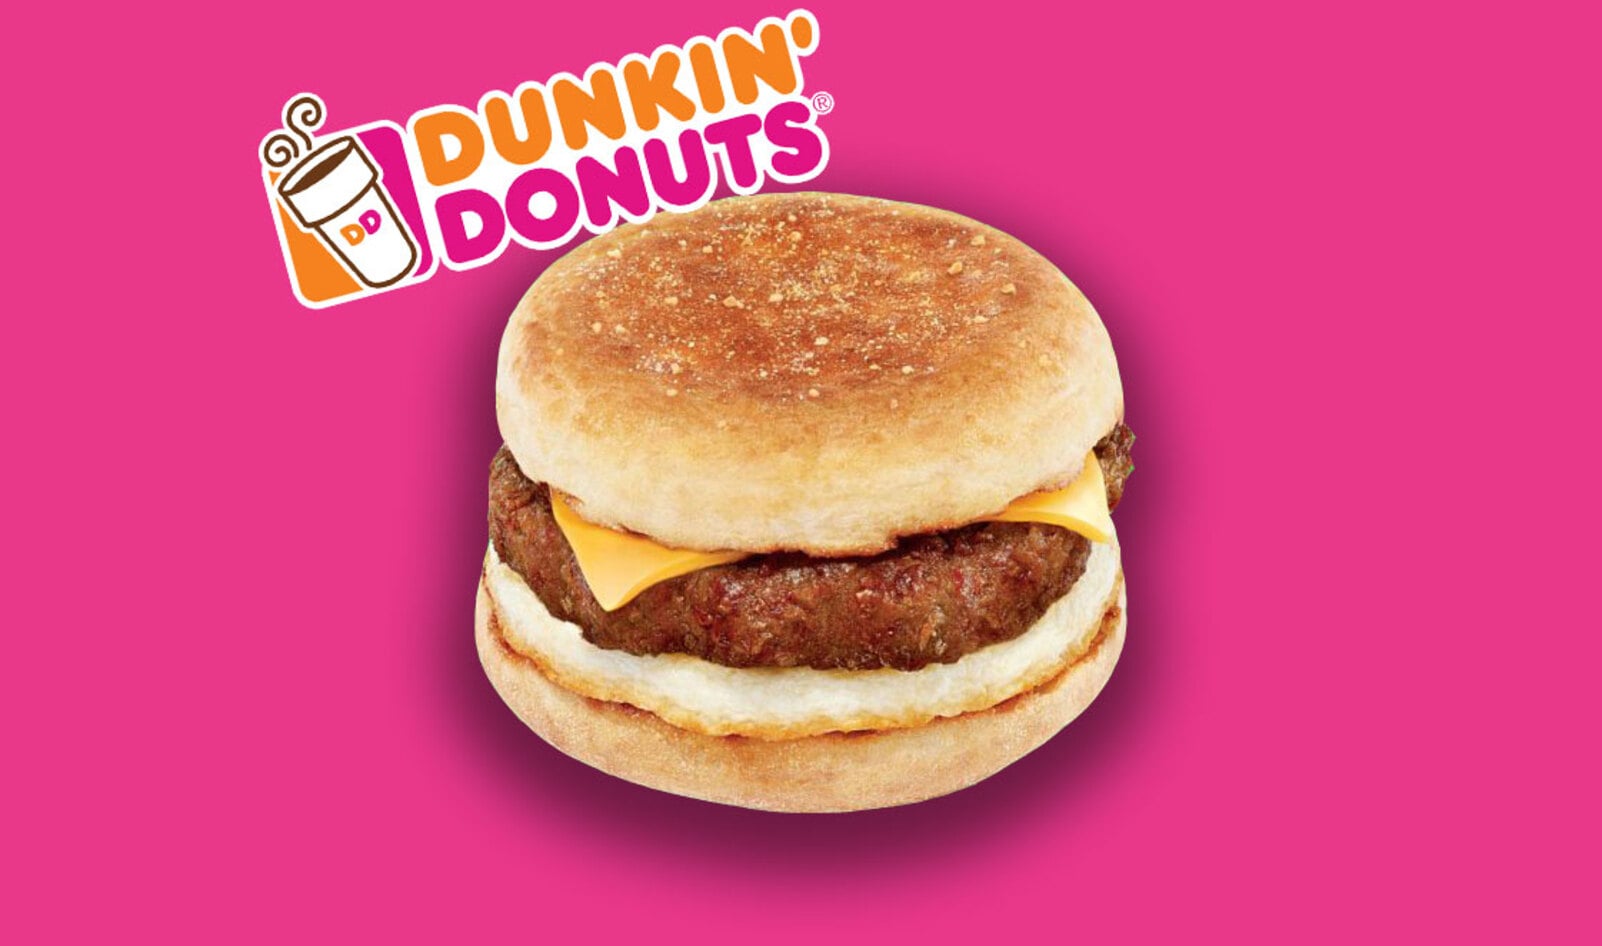 Dunkin’ CEO: “Beyond Meat Is a Partnership for Years to Come”